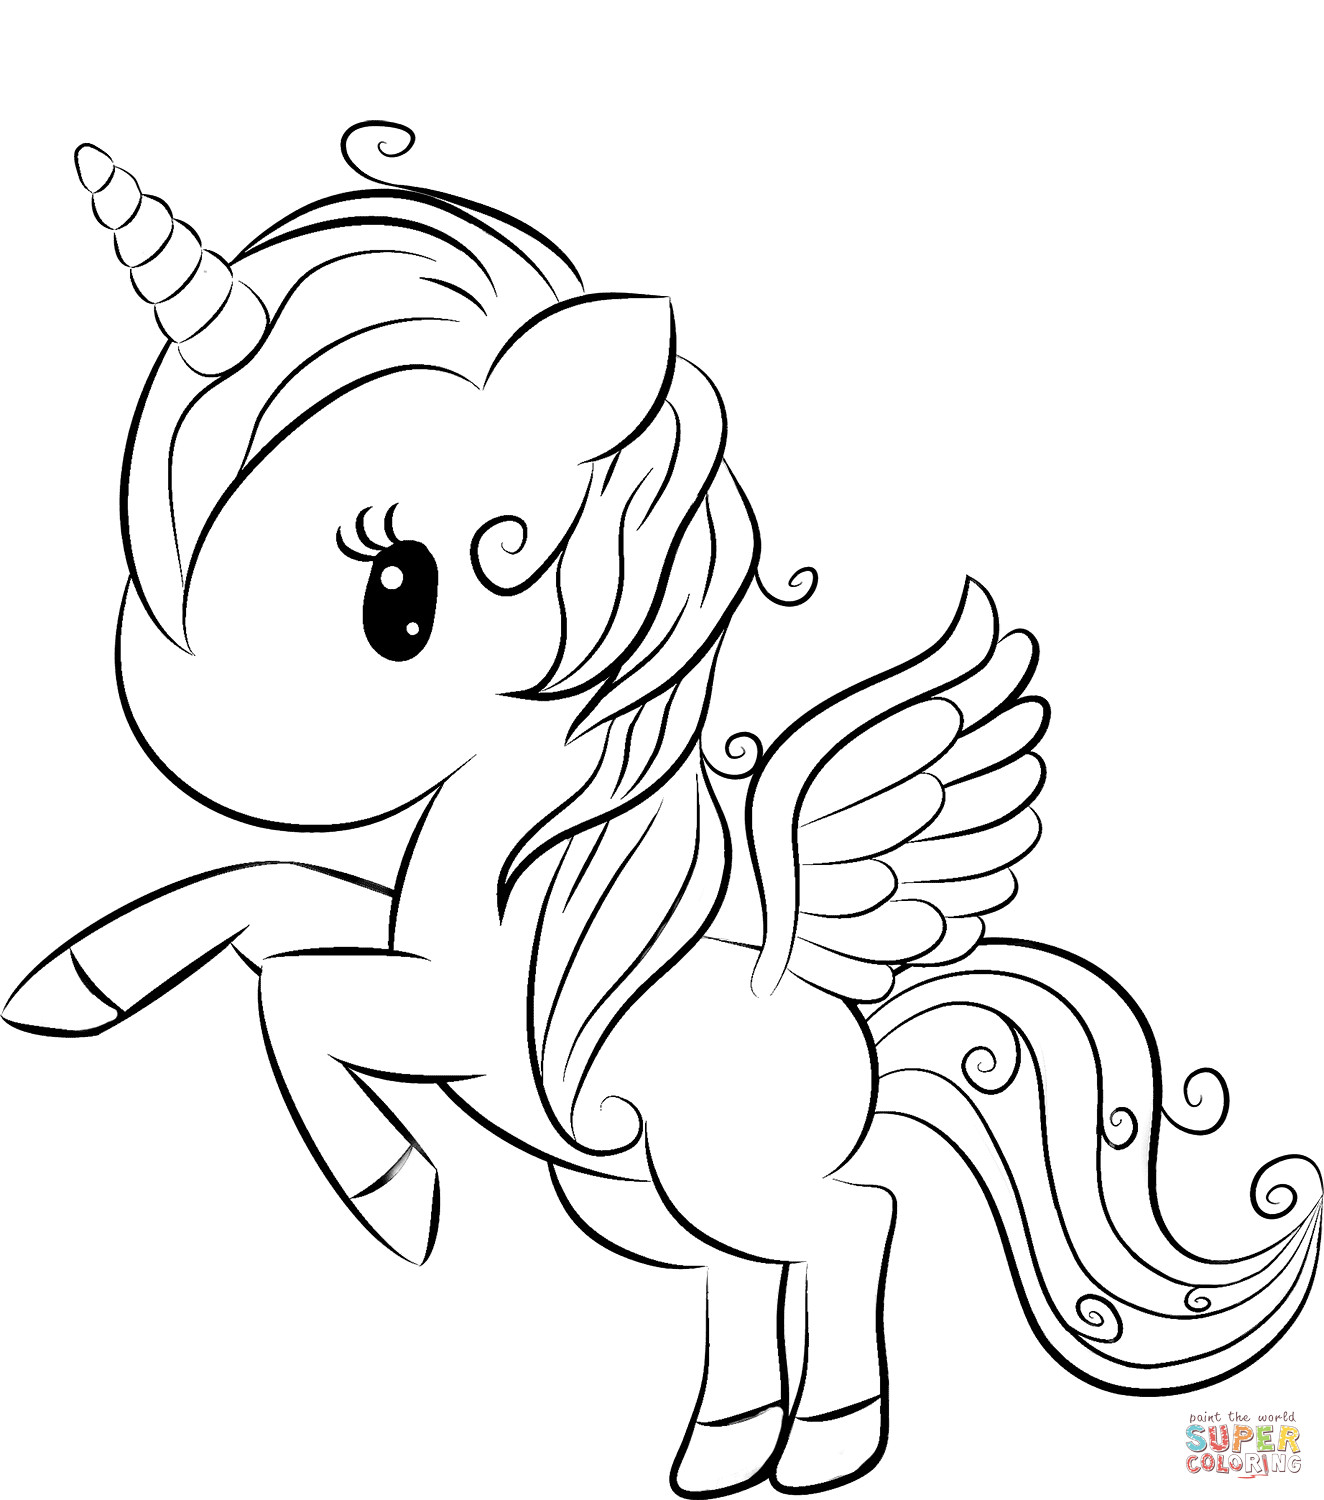 Cute Baby Unicorn Coloring Pages
 Cute Unicorn coloring page